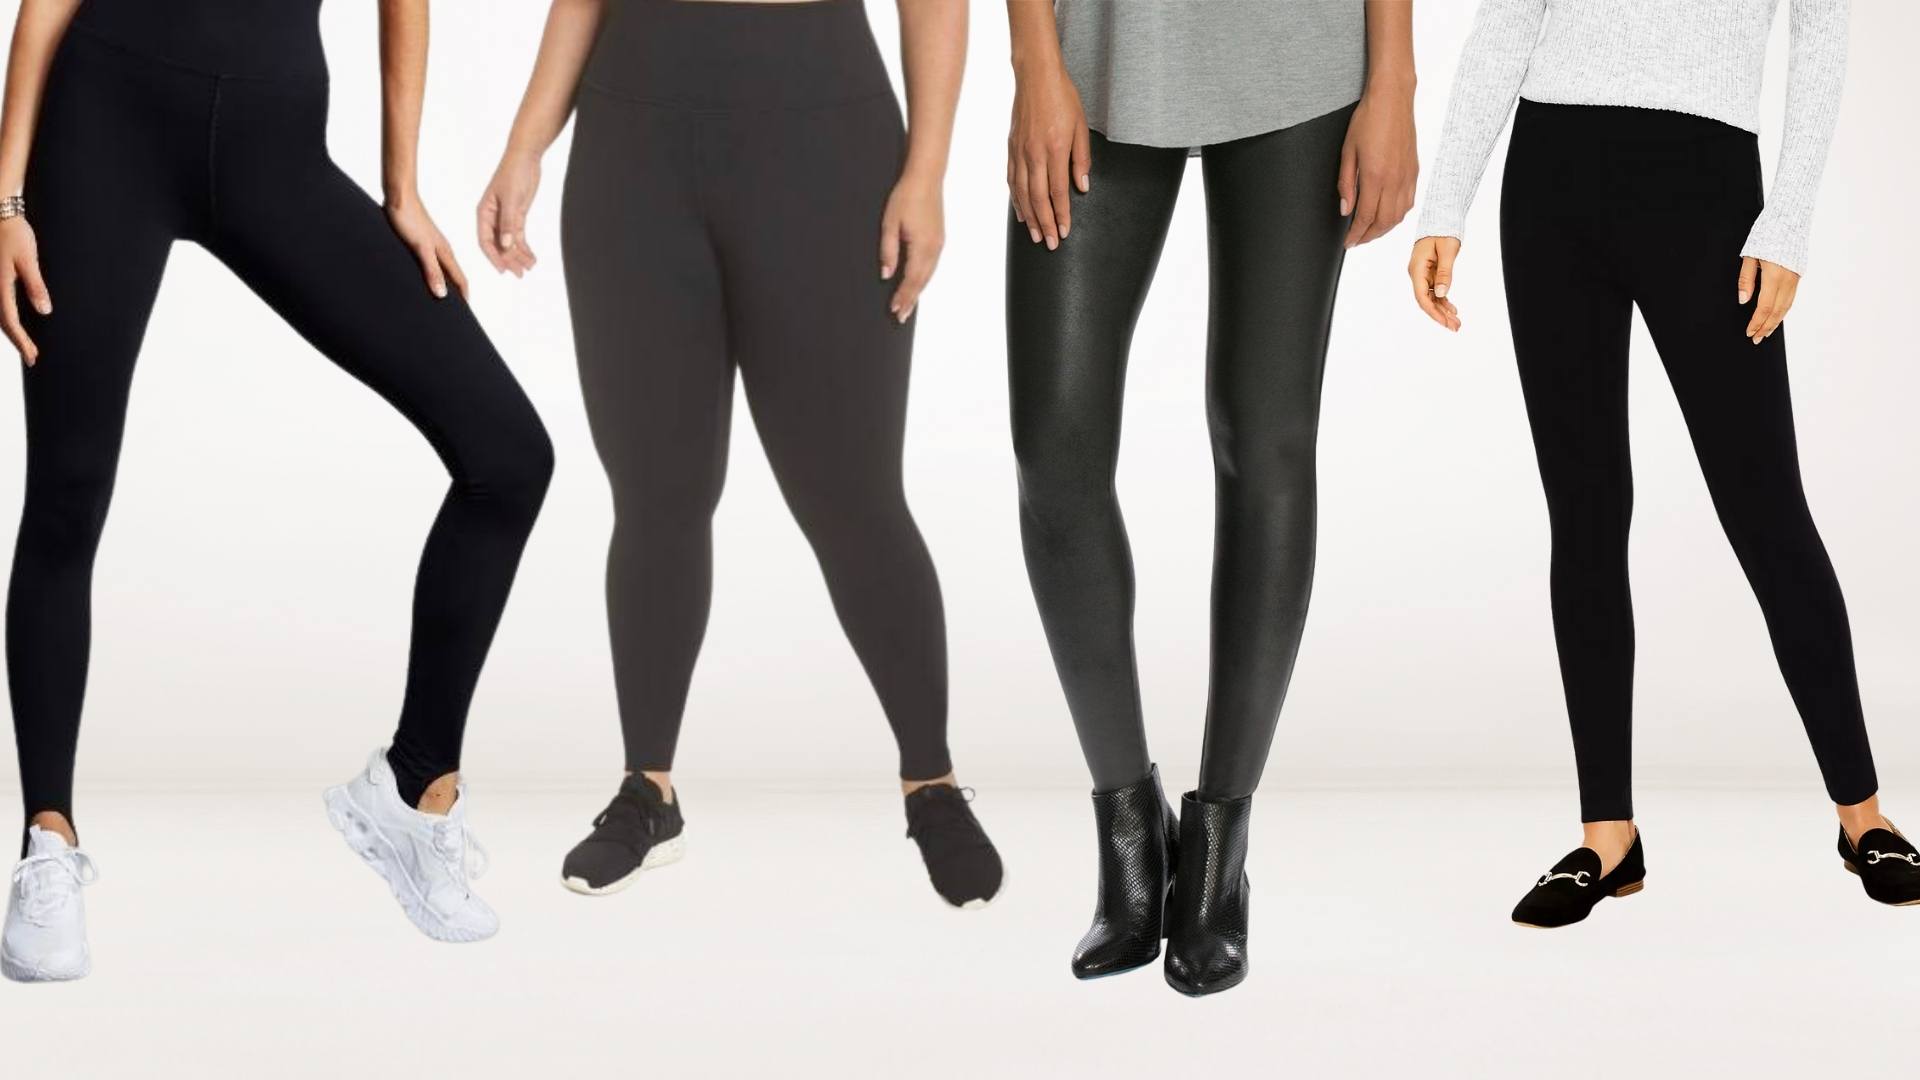 Choosing the correct leggings to suit your lifestyle